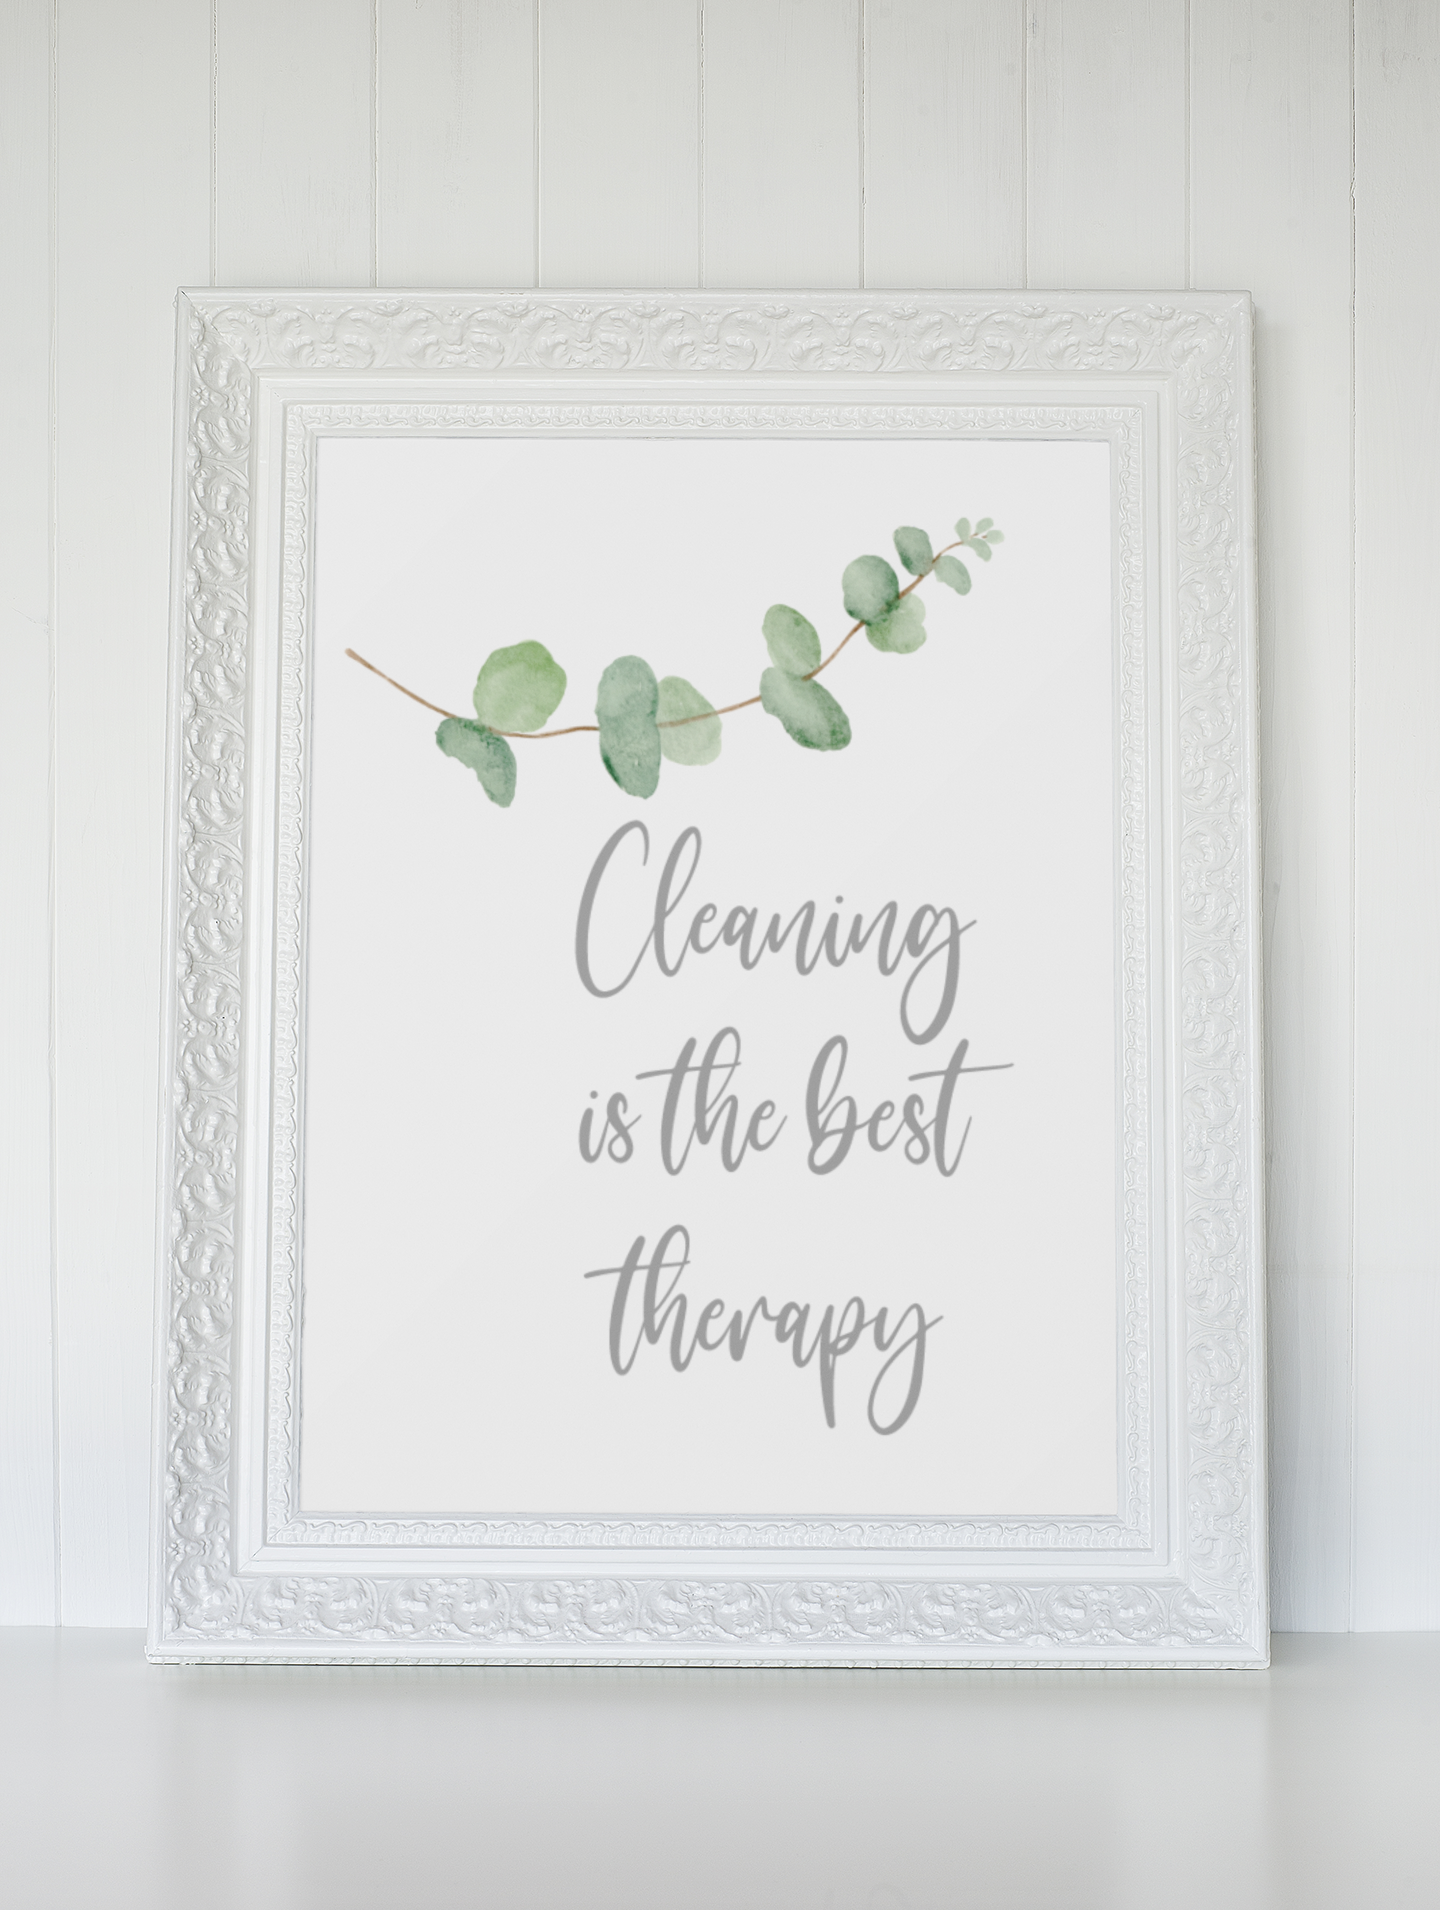 Cleaning Is The Best Therapy - Cleaning Wall Print